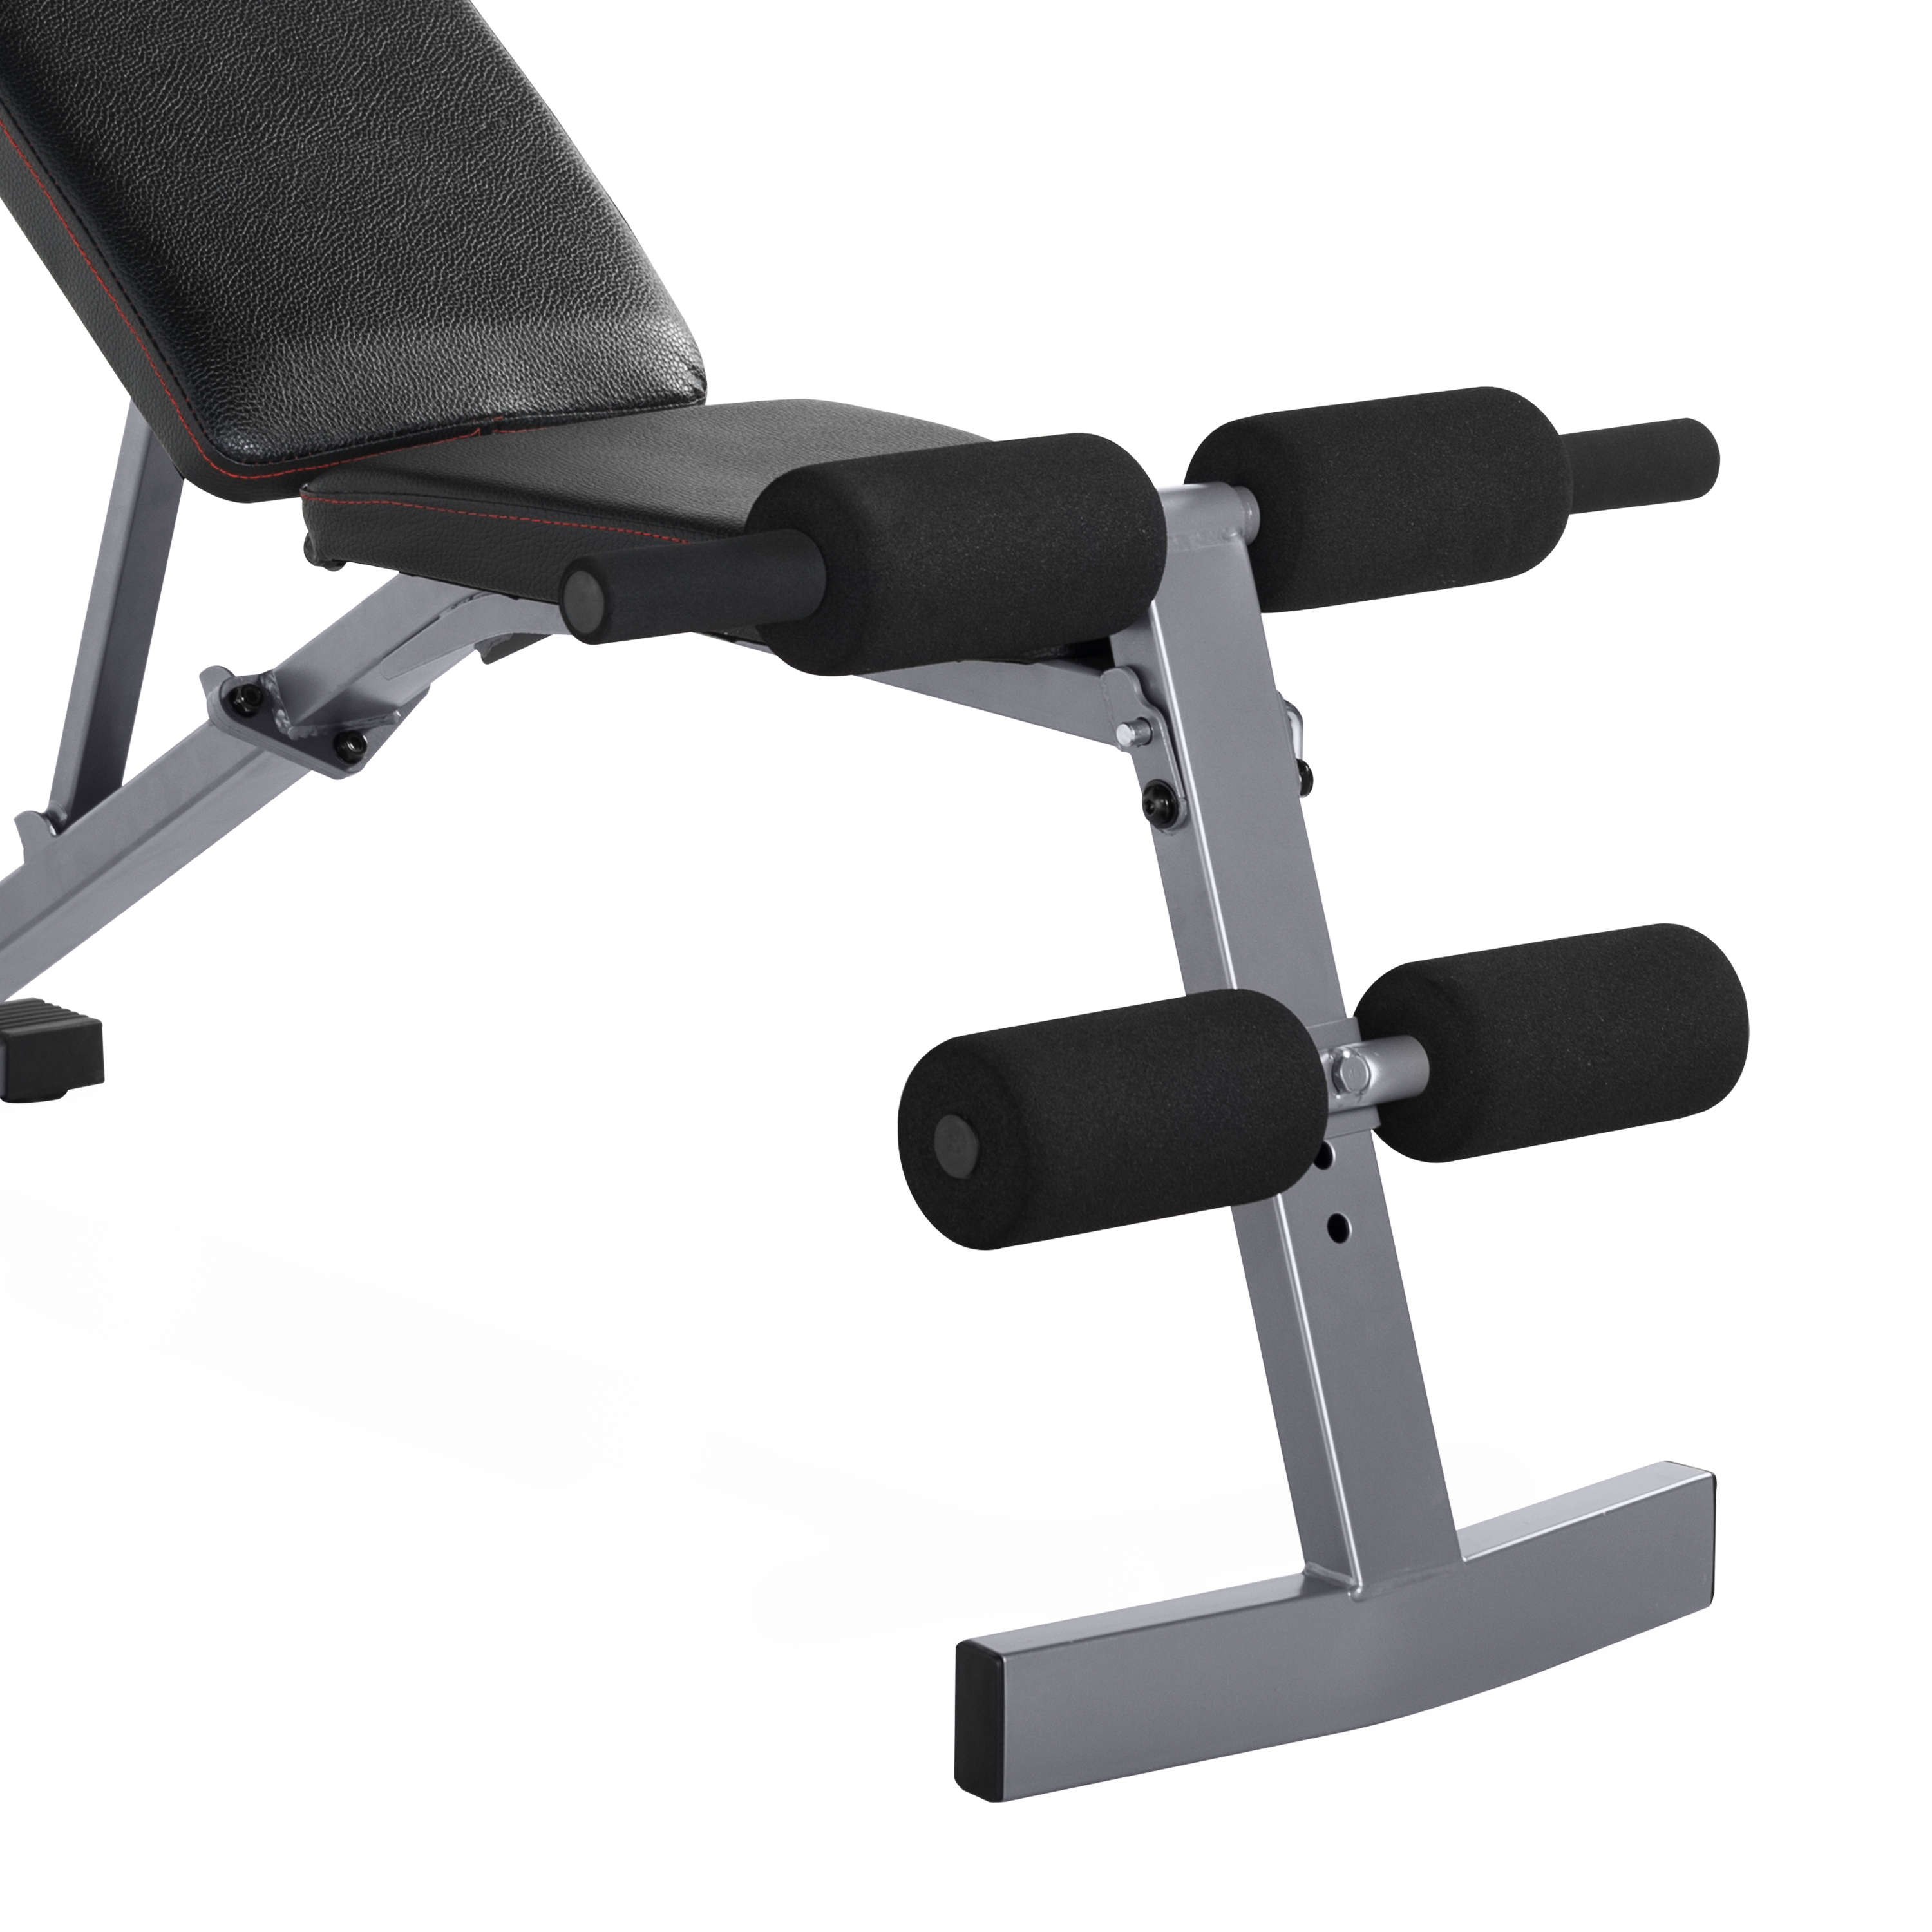 CAP Strength Adjustable FID Workout Bench (600 lb Weight Capacity), Black & Gray - image 2 of 10